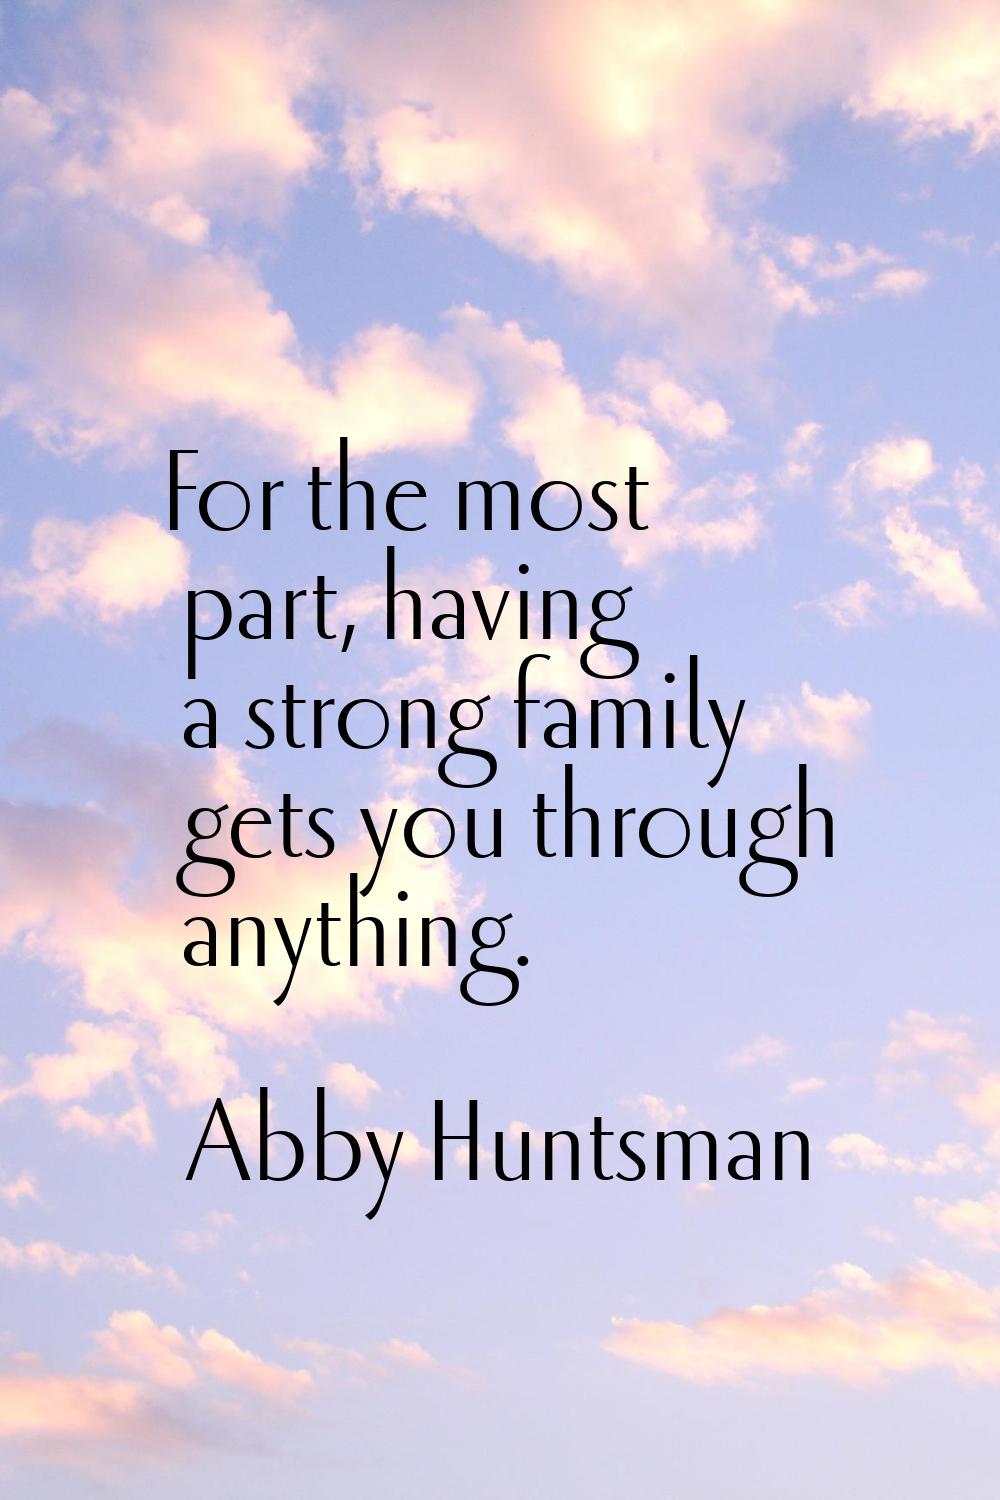 For the most part, having a strong family gets you through anything.